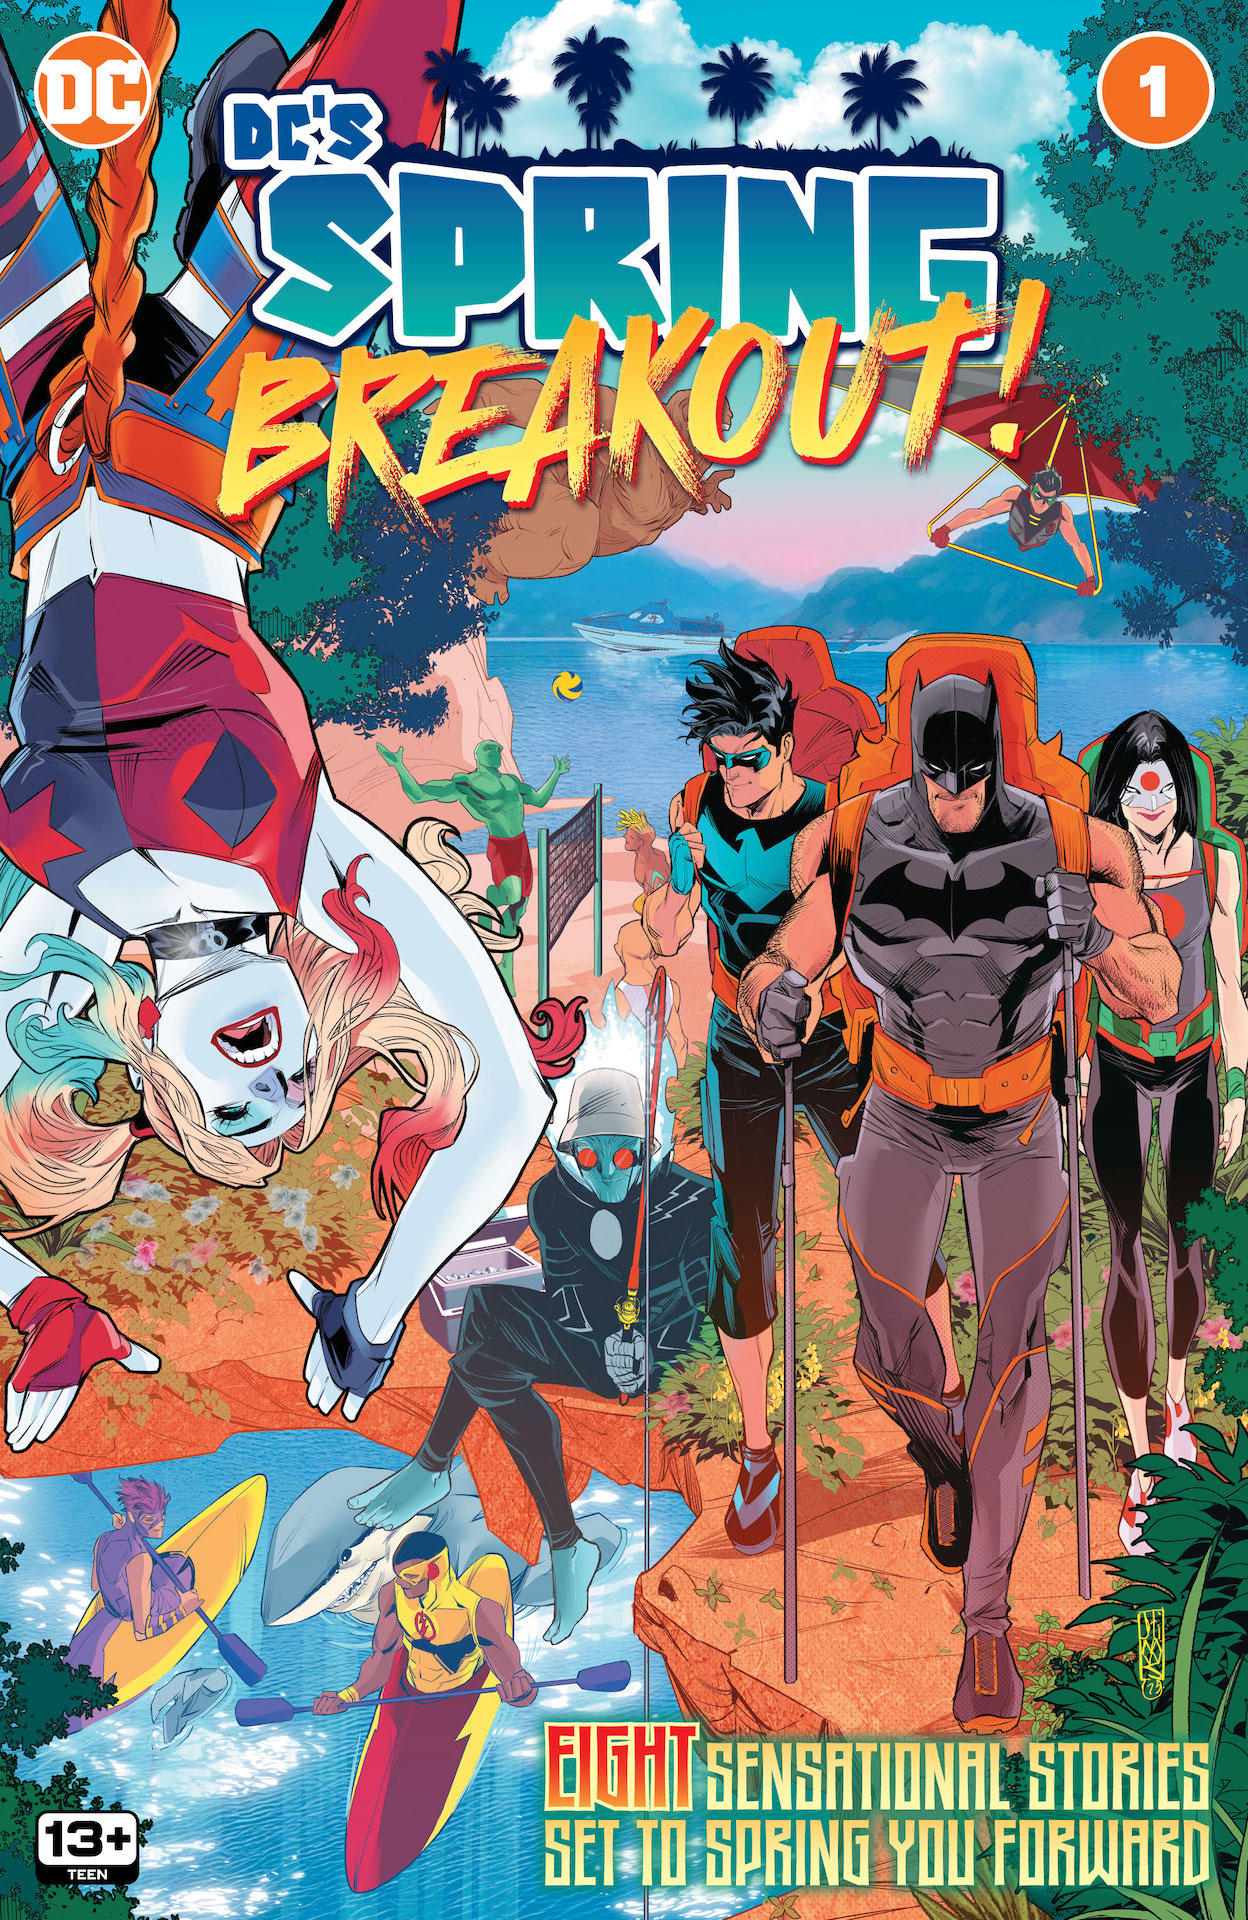 DC Preview: DC's Spring Breakout! #1